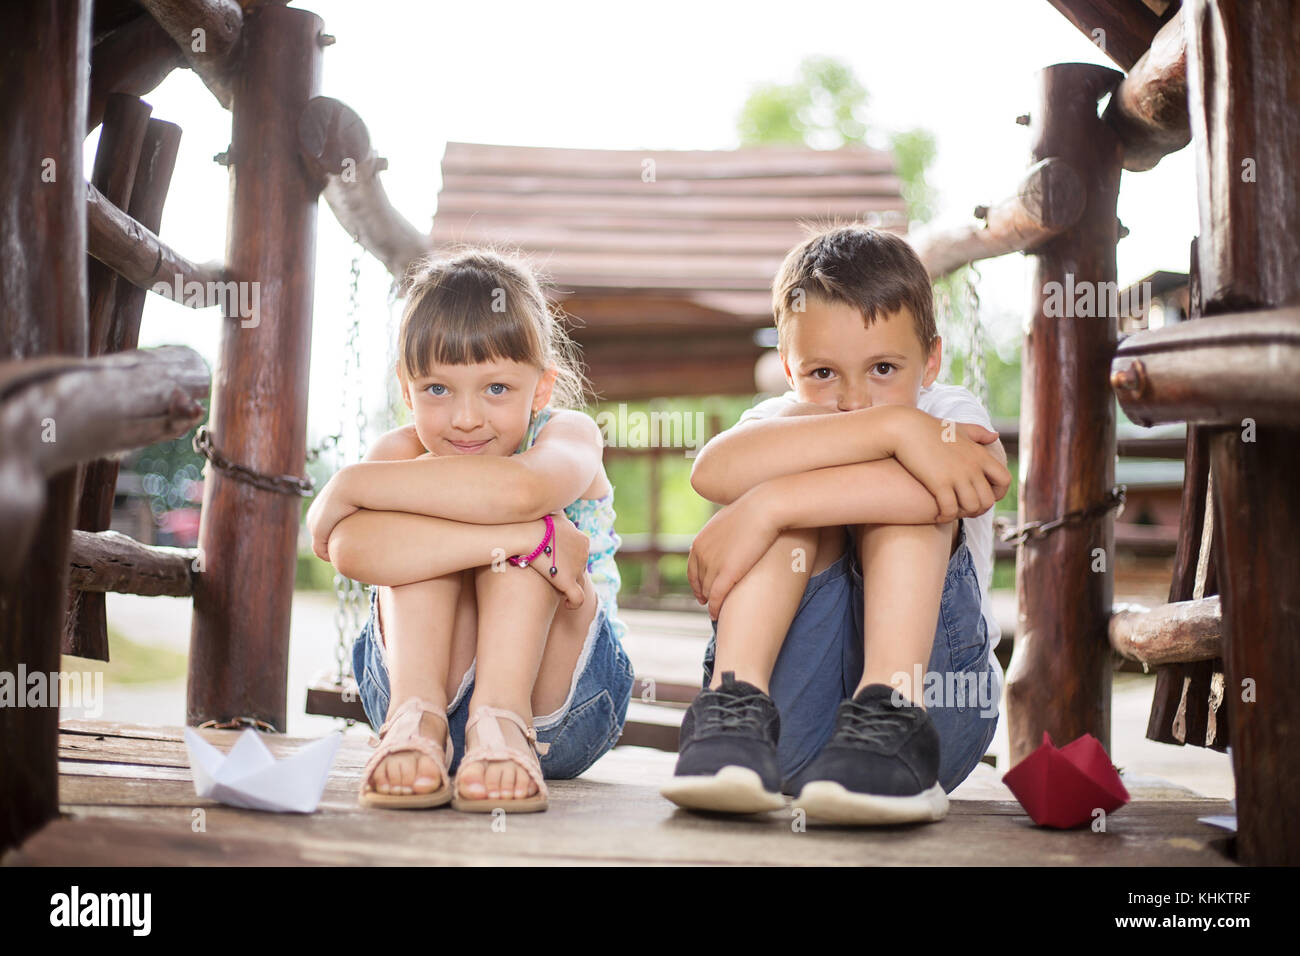 Two young caucasian children sitting next to each other with bent knees in a wooden house, outdoors on sunny summer day. They look innocent Stock Photo